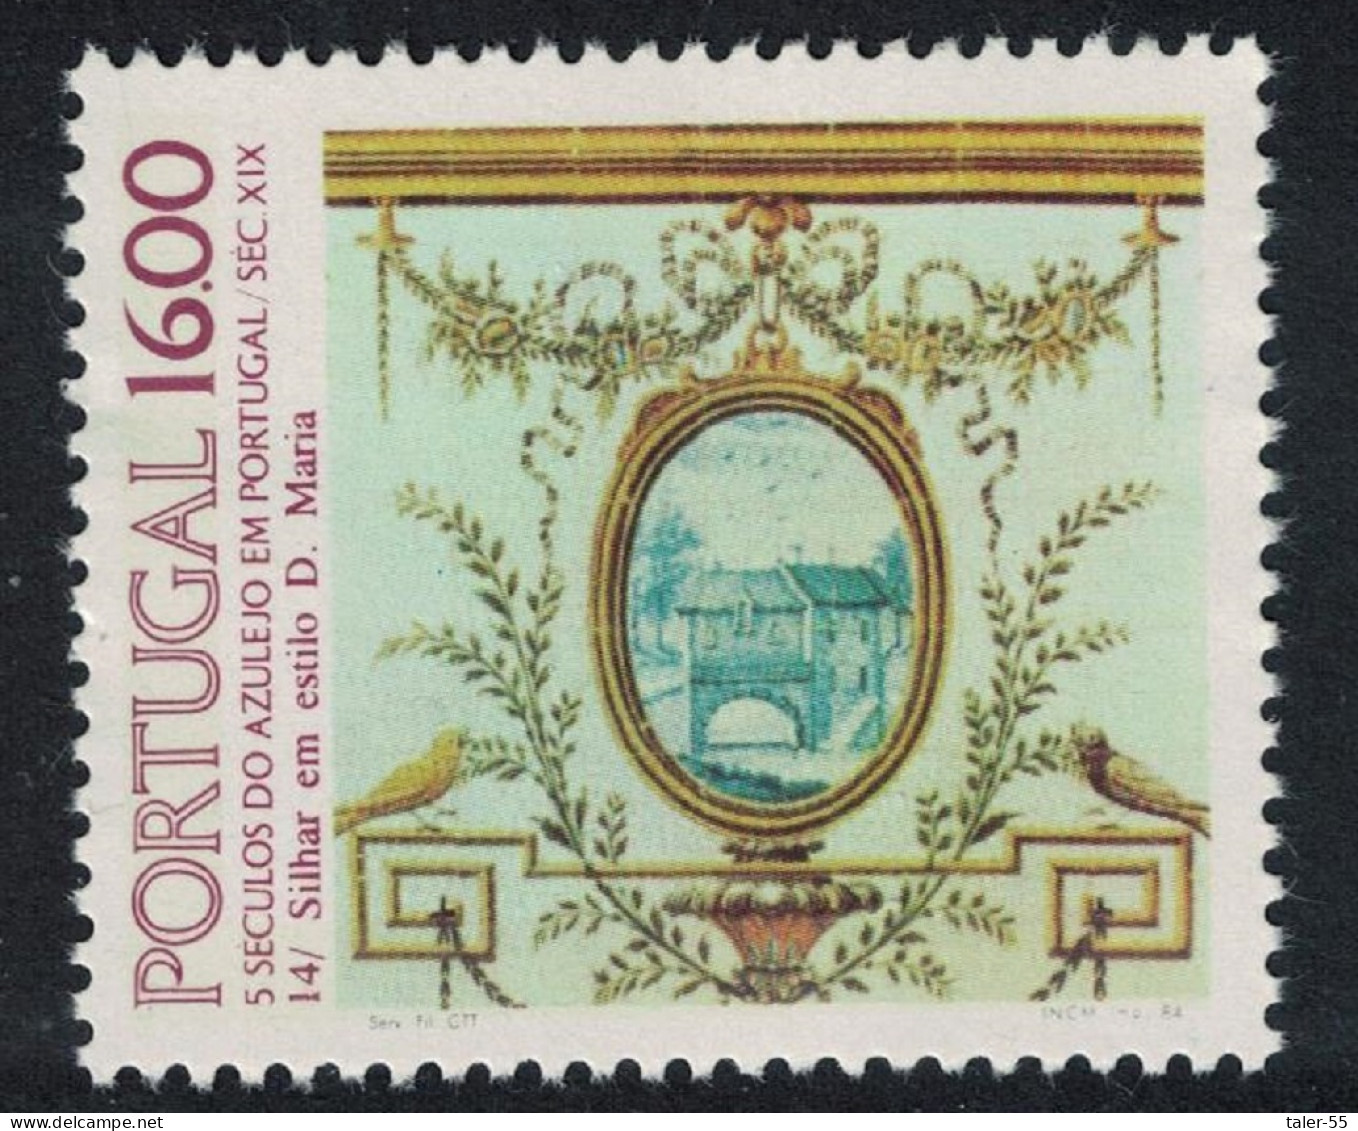 Portugal Tiles 14th Series 1984 MNH SG#1970 - Unused Stamps